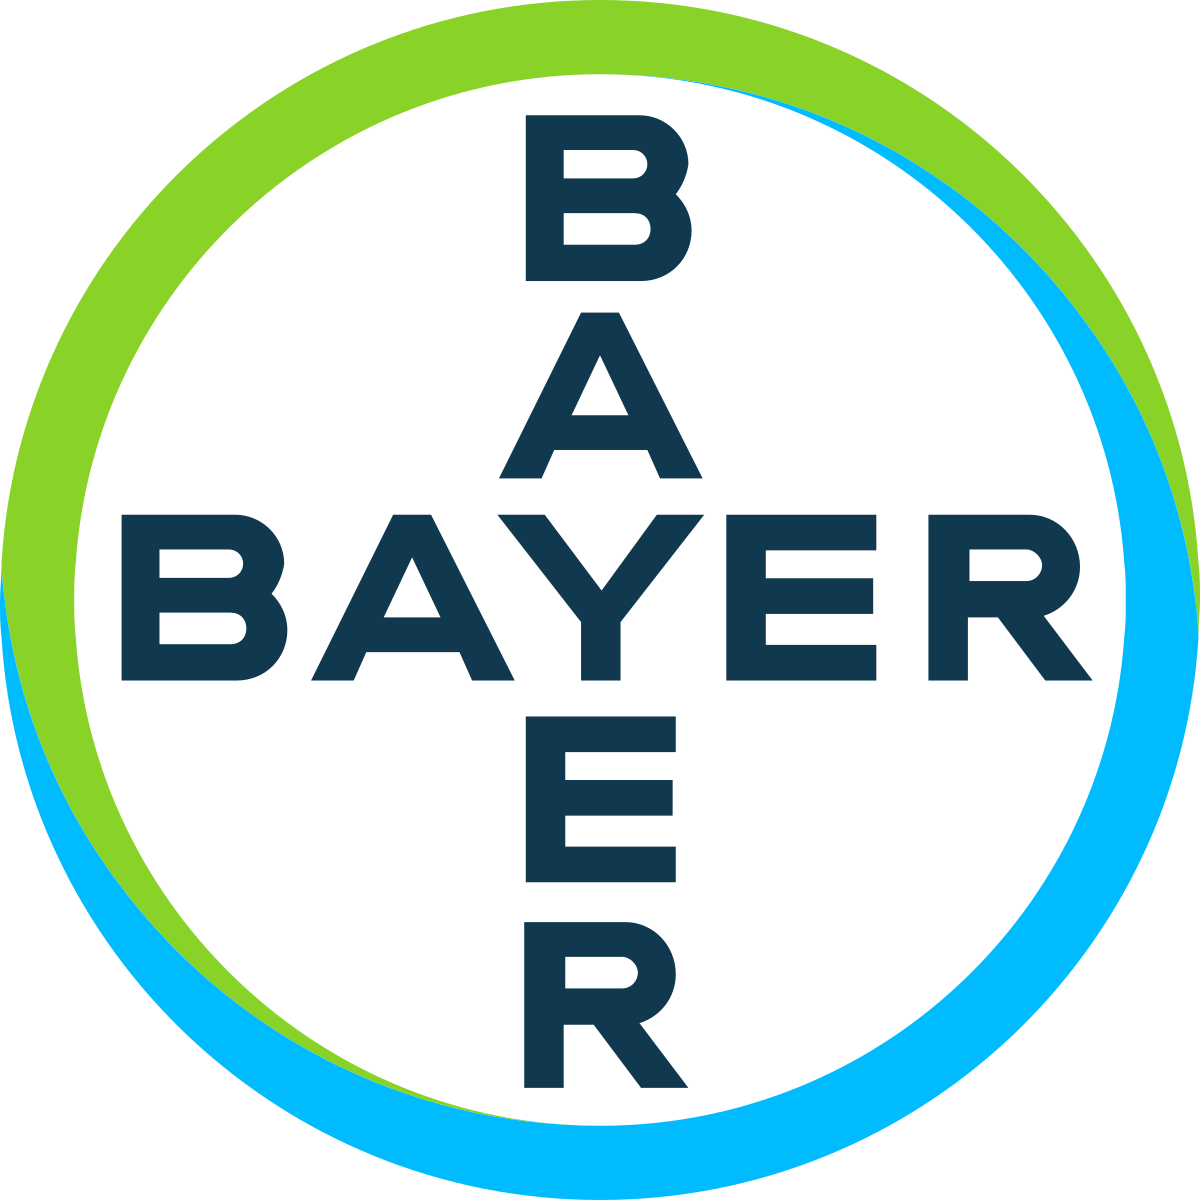 BAYER logo with a circle, the word Bayer overlapping horizontally and vertically, sharing the letter Y